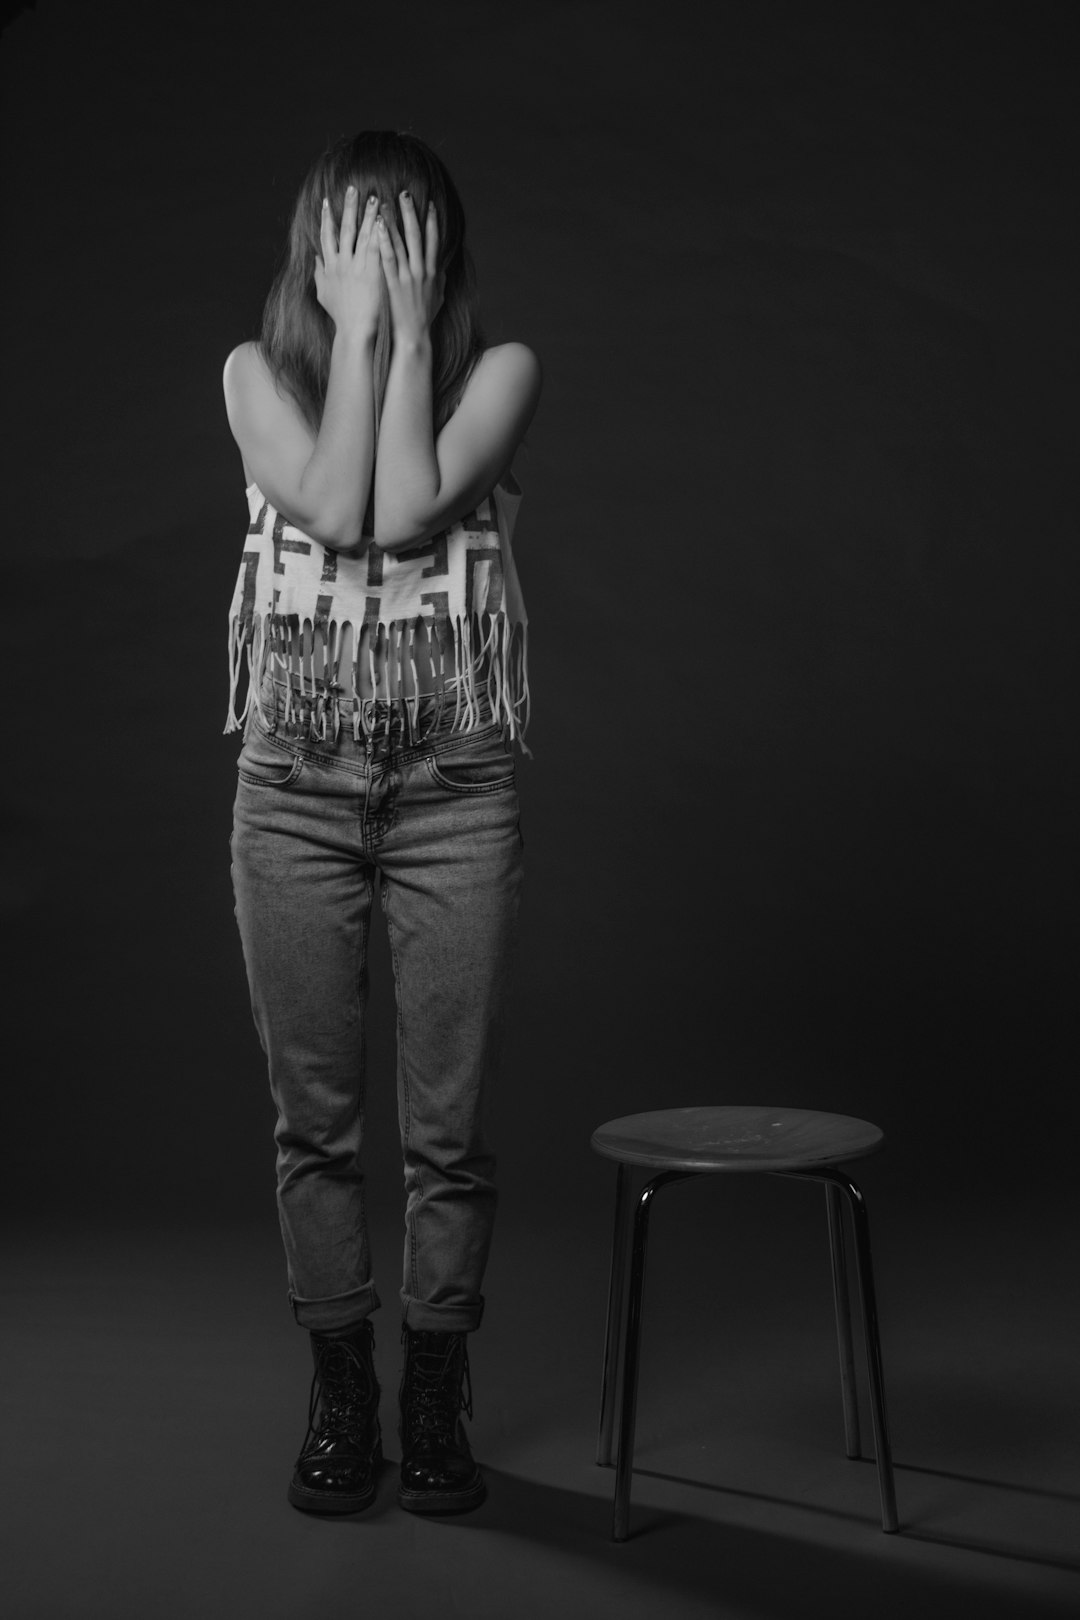 grayscale photo of woman in tank top and denim jeans